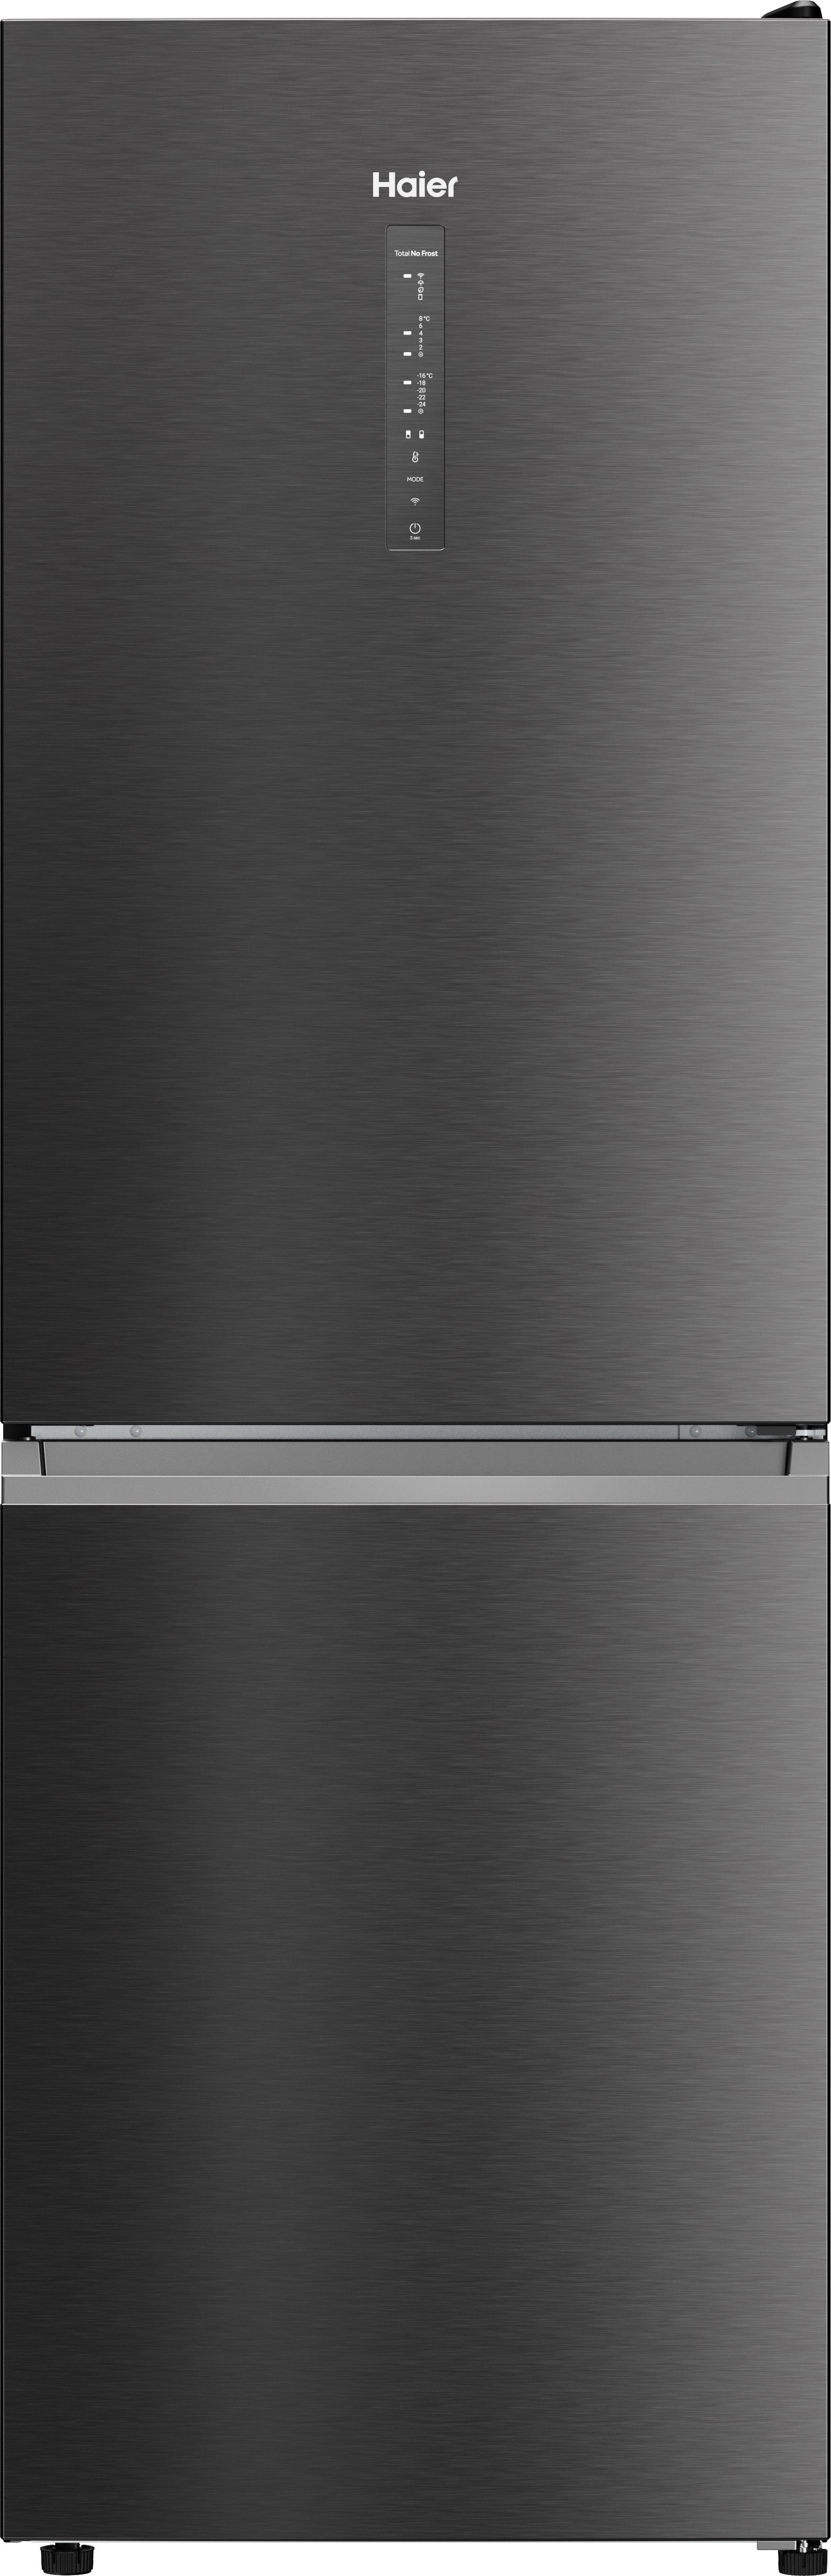 Haier HDW3618DNPD(UK) Wifi Connected 60/40 Frost Free Fridge Freezer - Premium Inox - D Rated, Stainless Steel